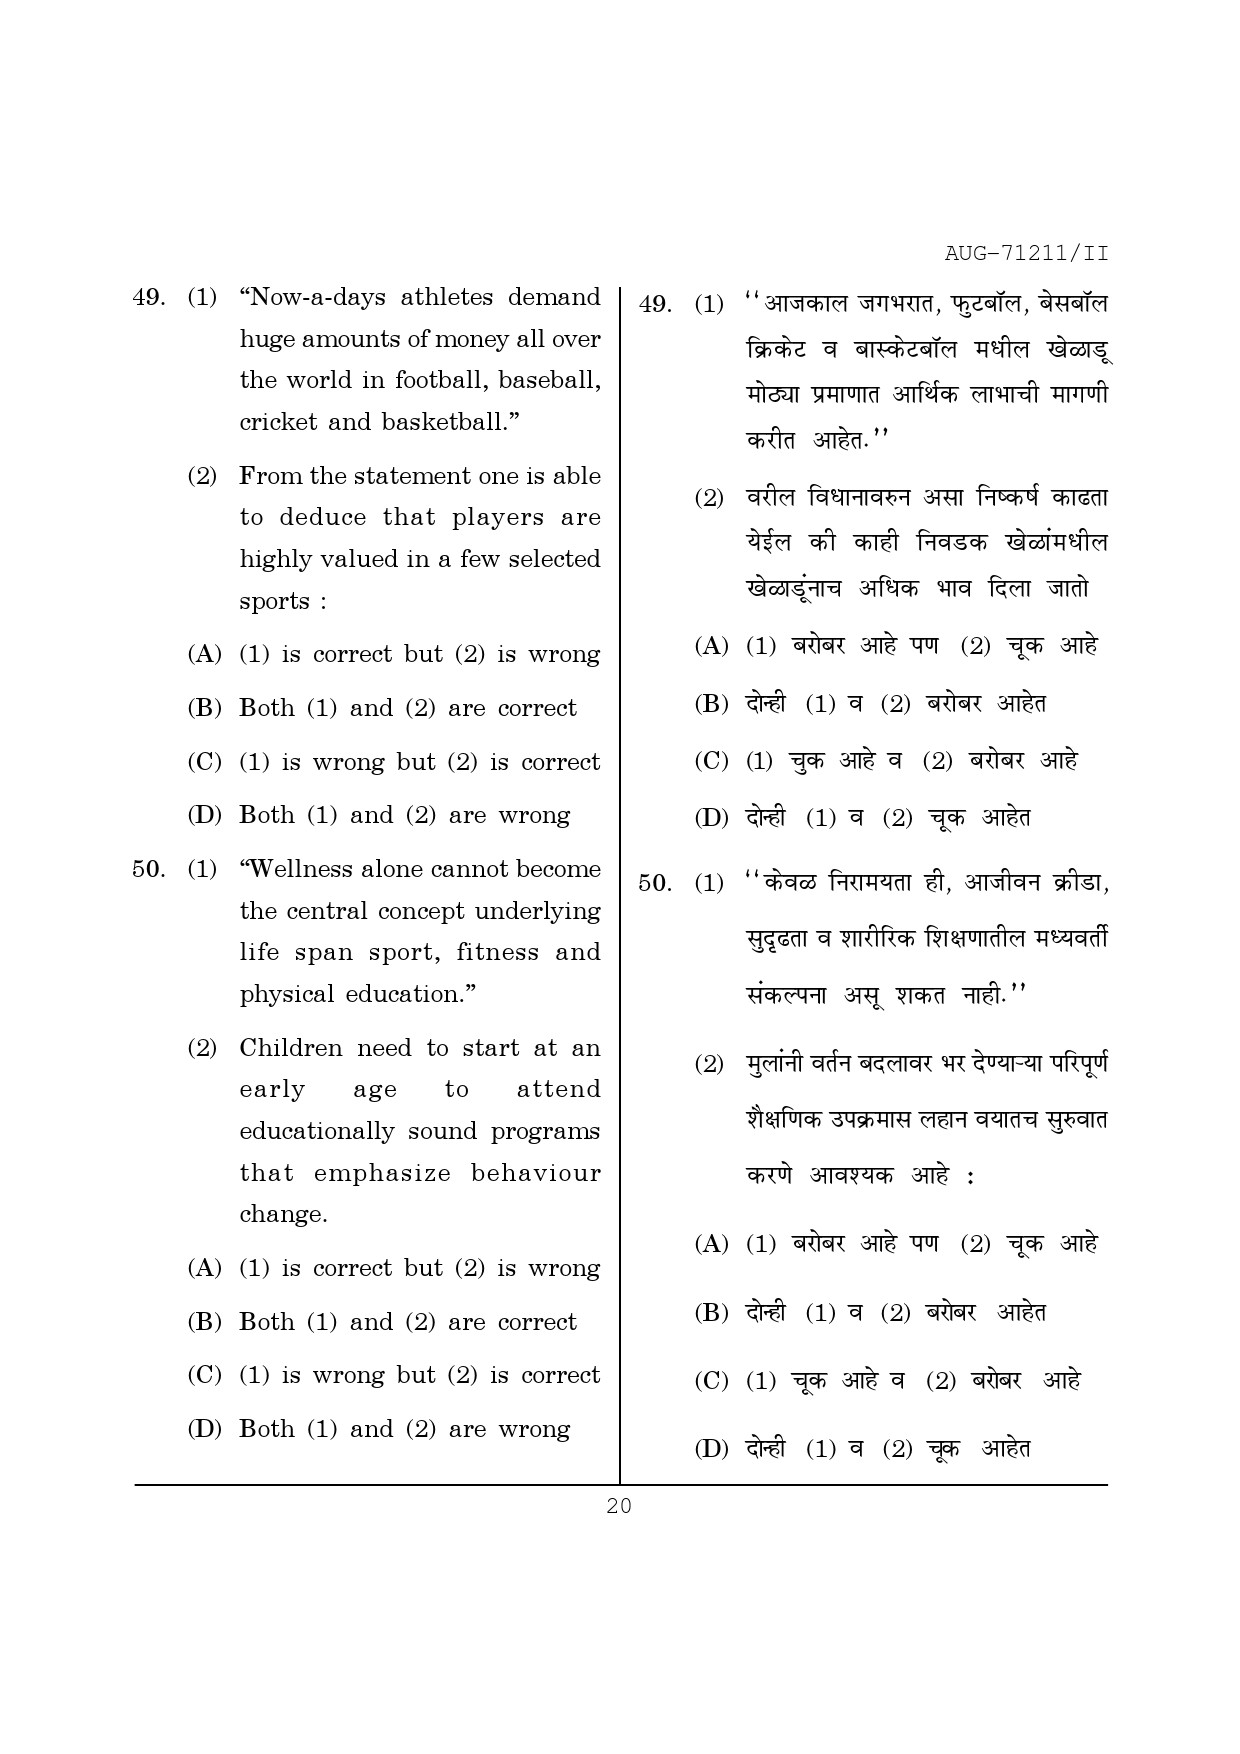 Maharashtra SET Physical Education Question Paper II August 2011 20